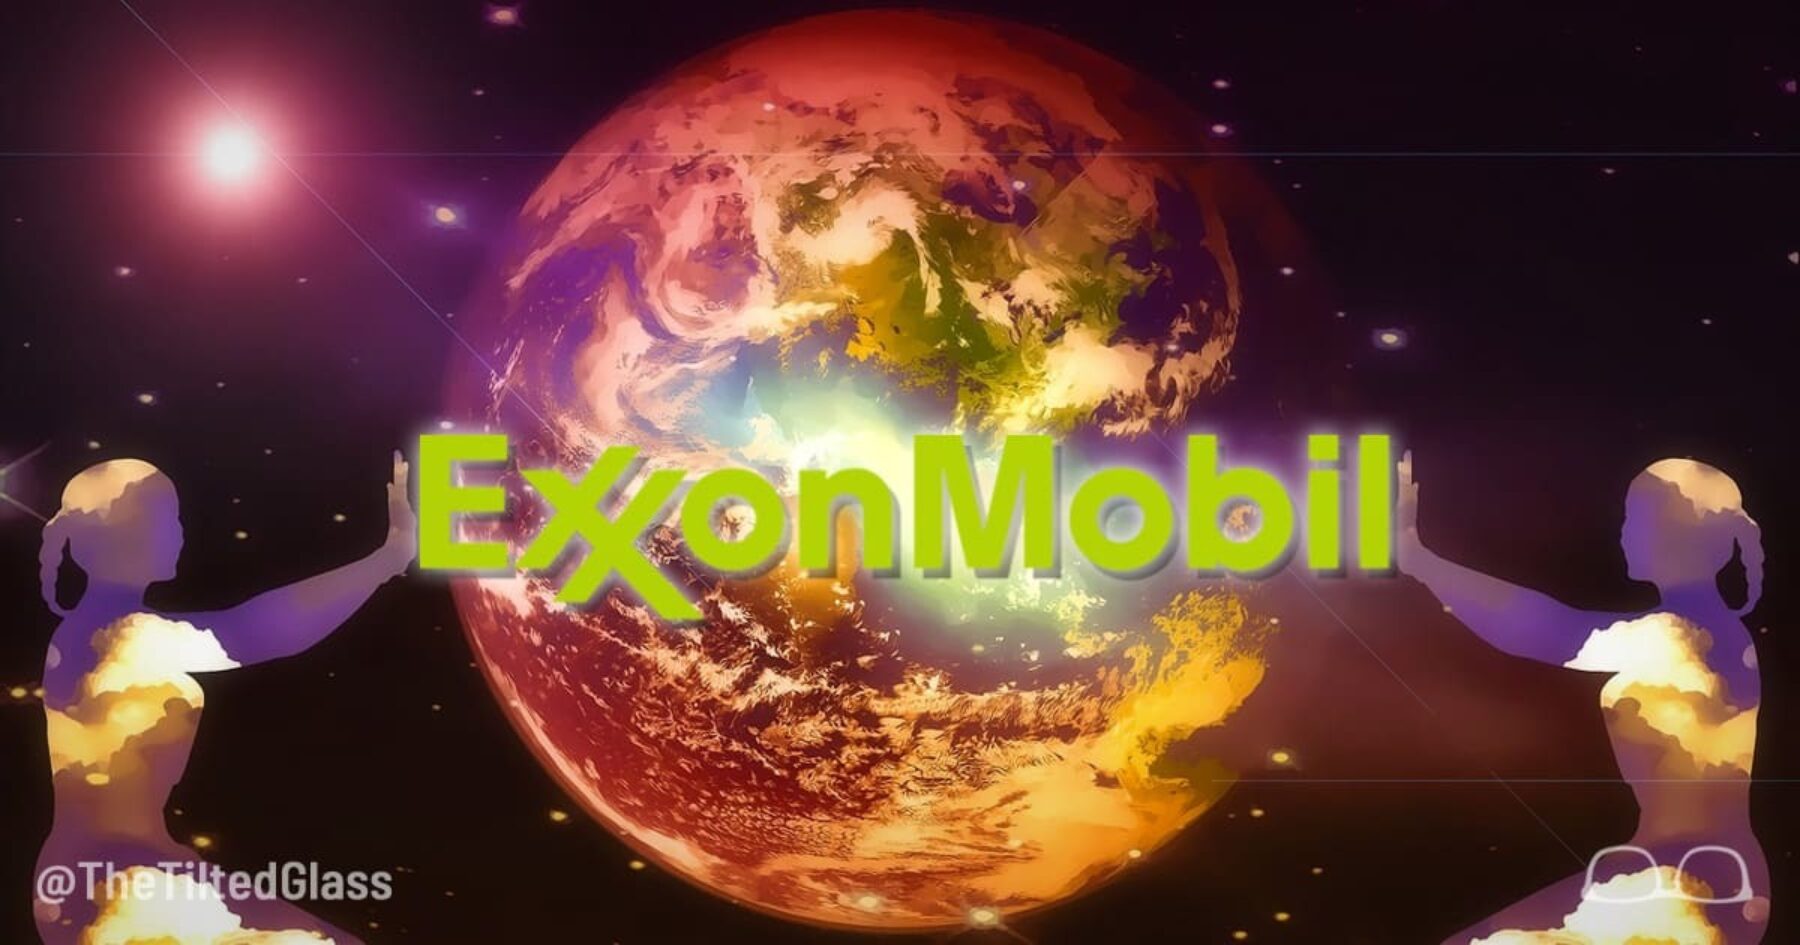 ExxonMobil will Become 100% Green by 2020